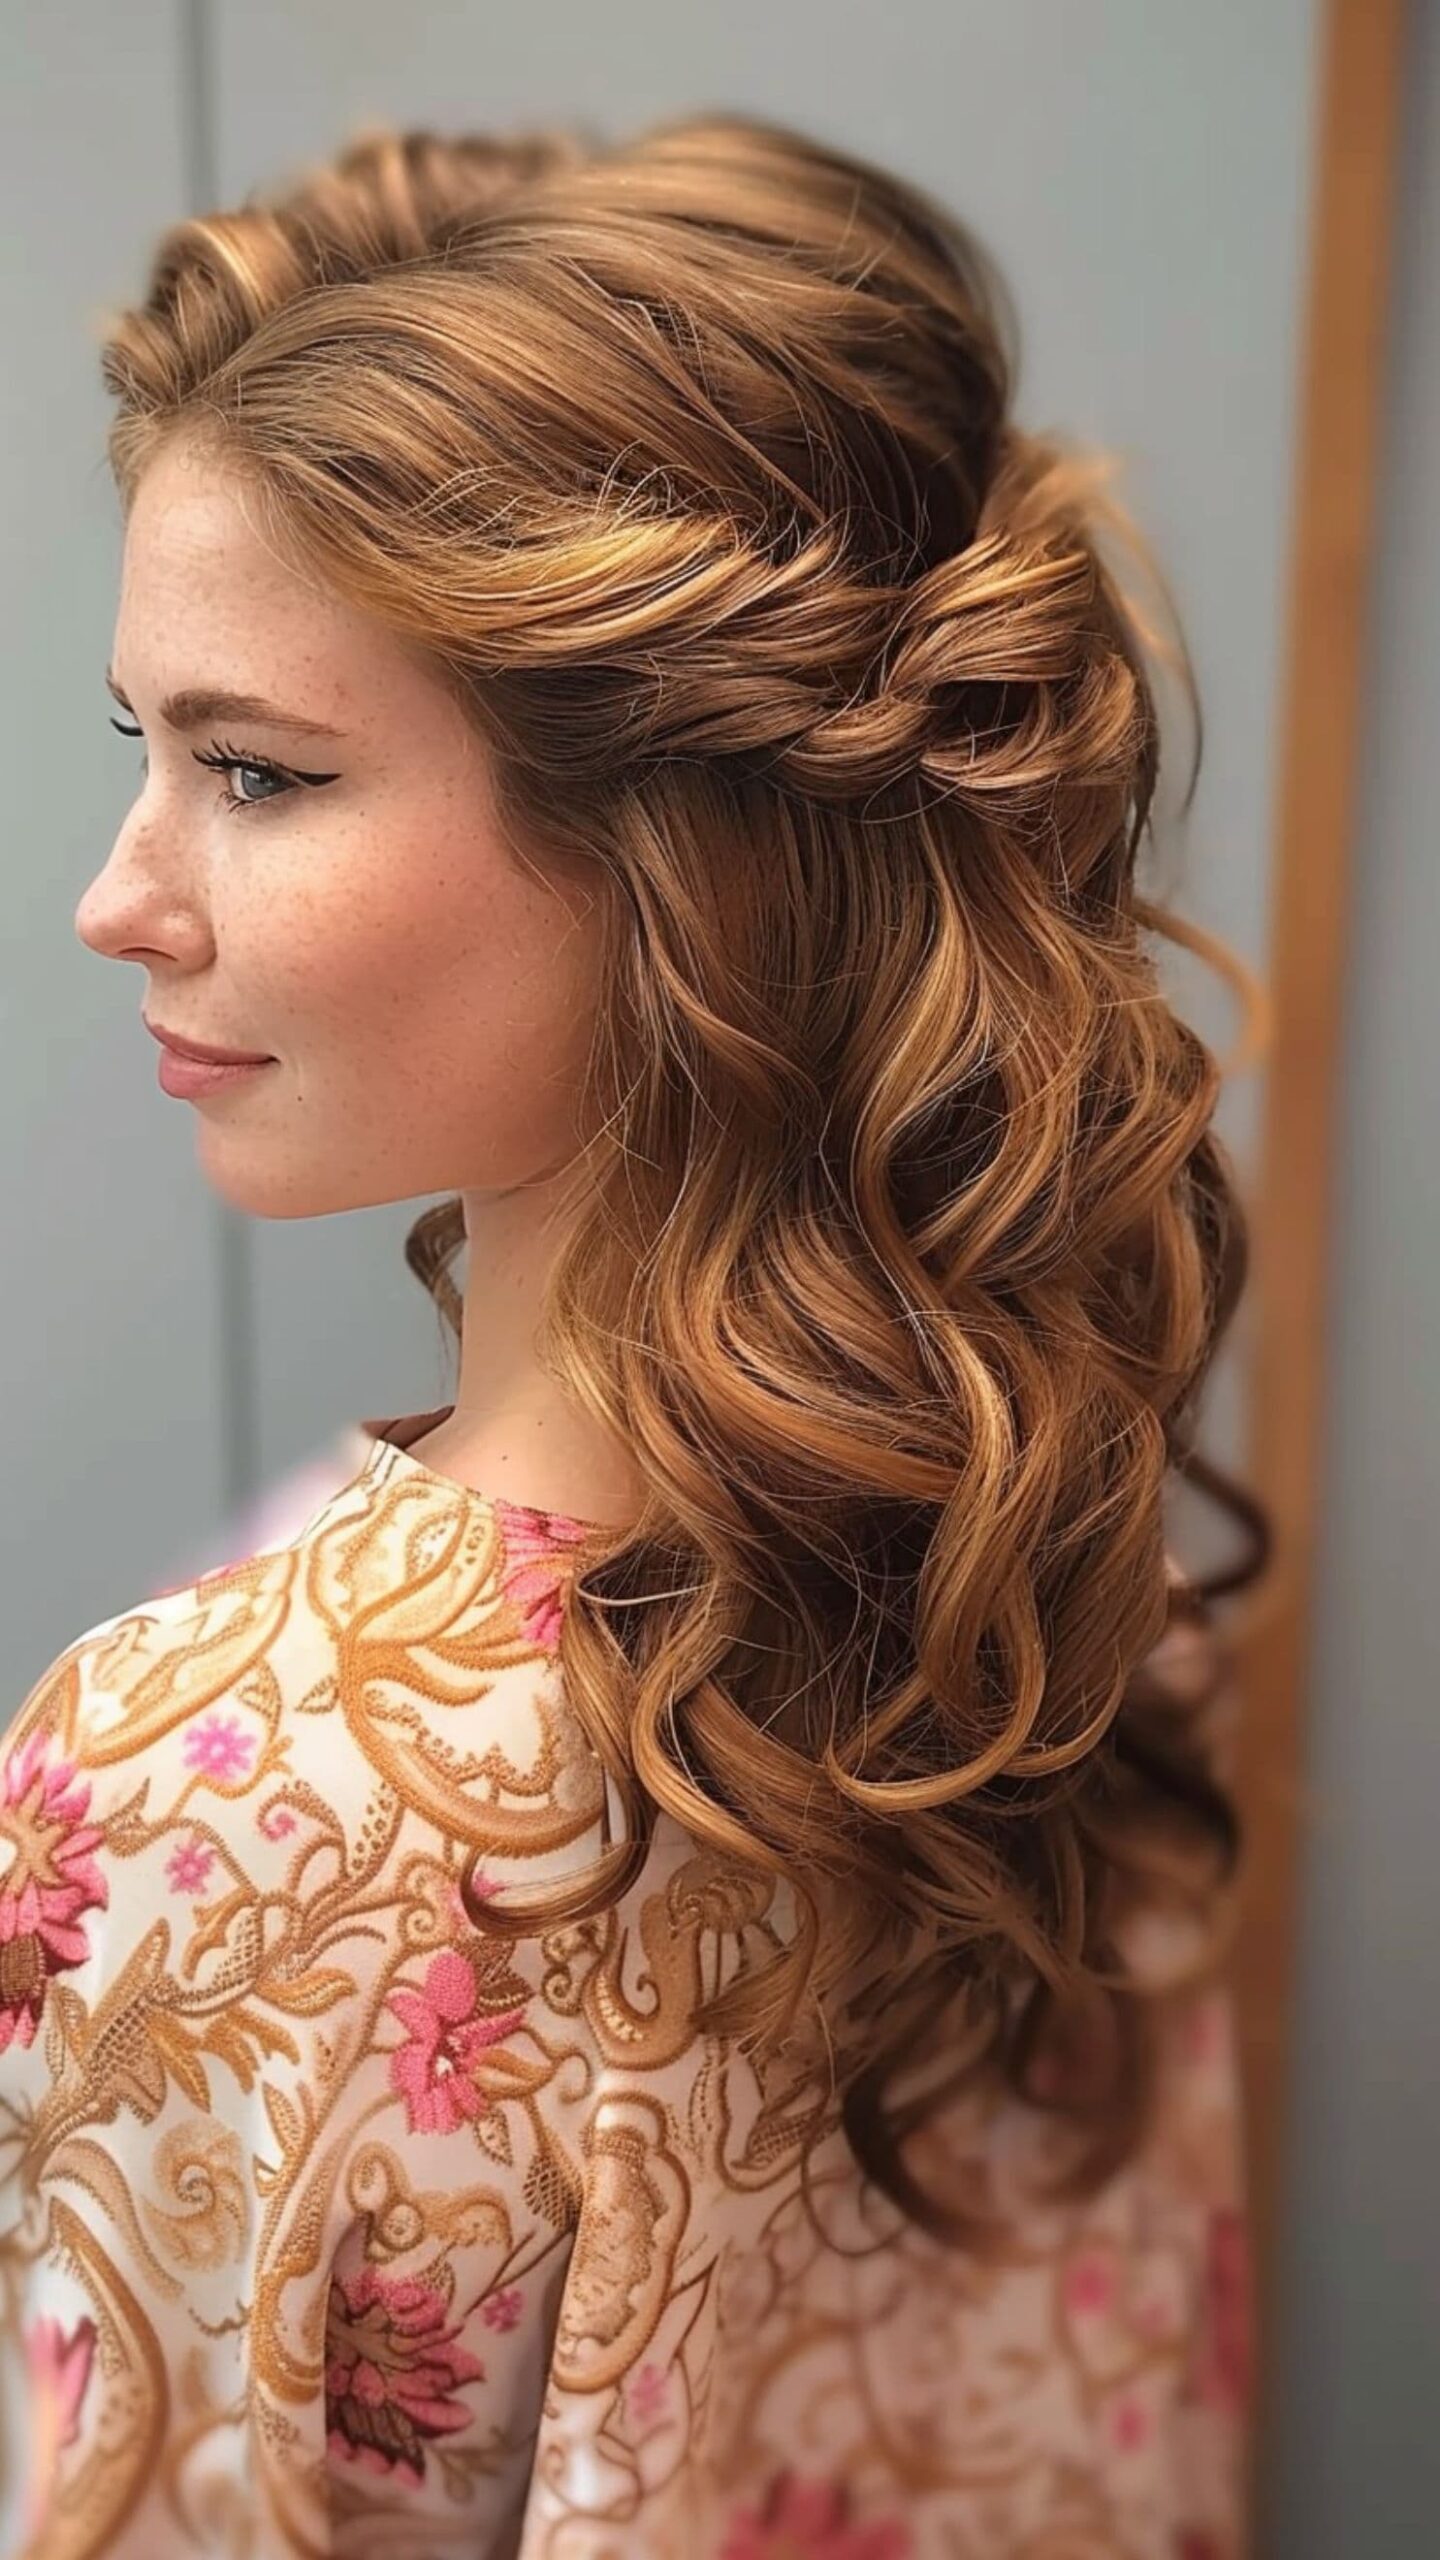 A woman modelling a half-up half-down curls hairstyle.